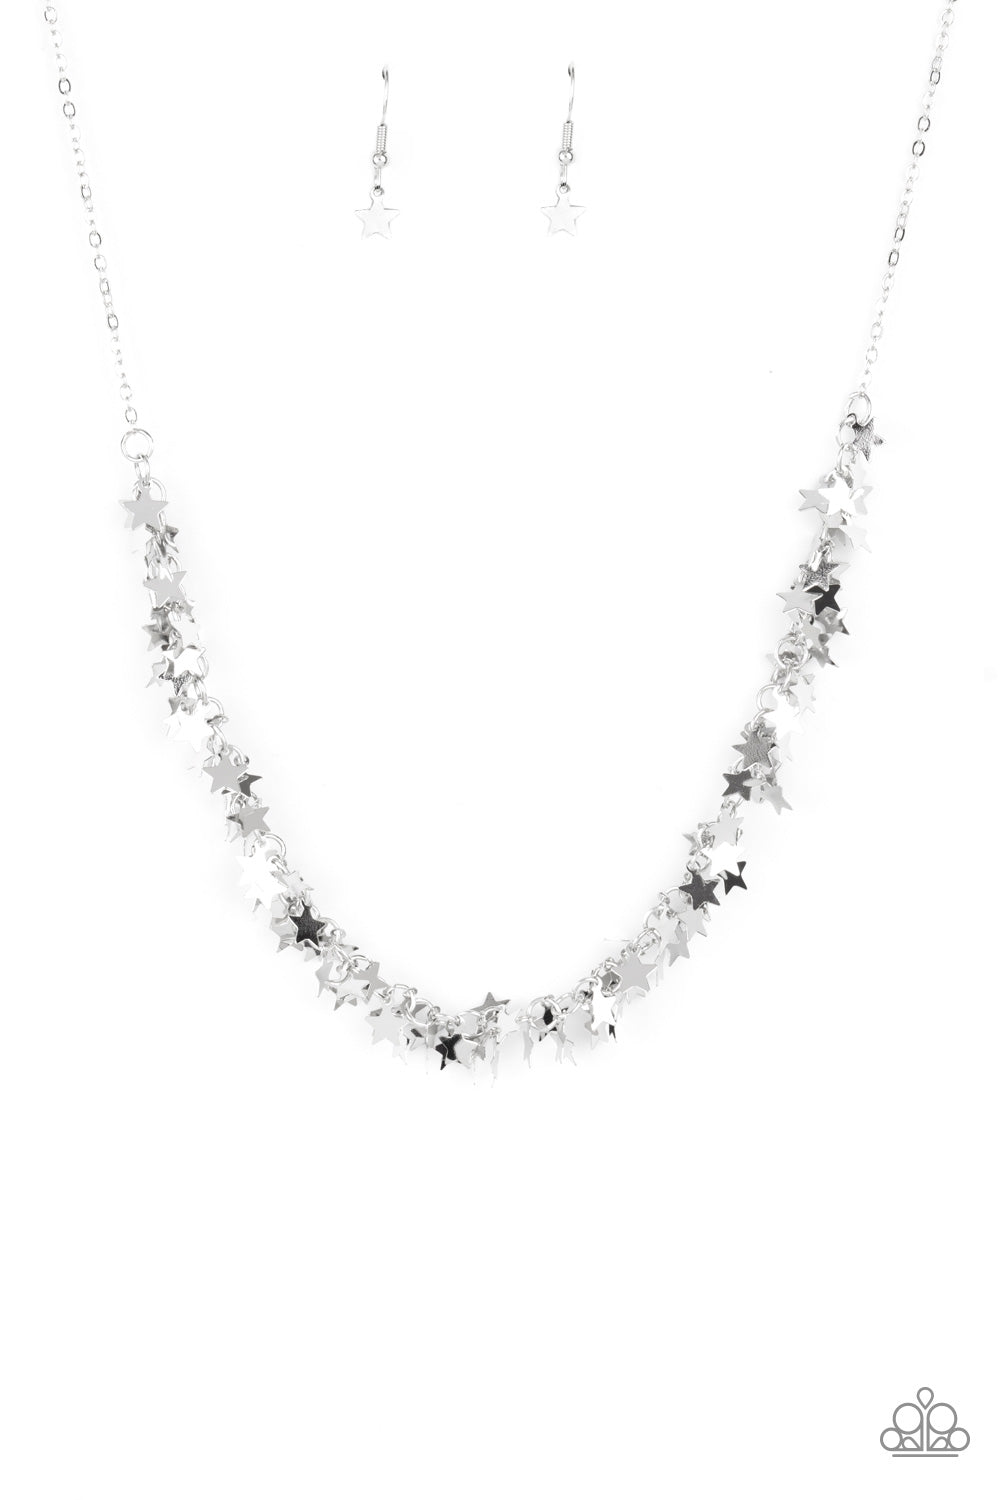 A glistening collection of dainty silver star charms delicately cluster on a classic silver chain